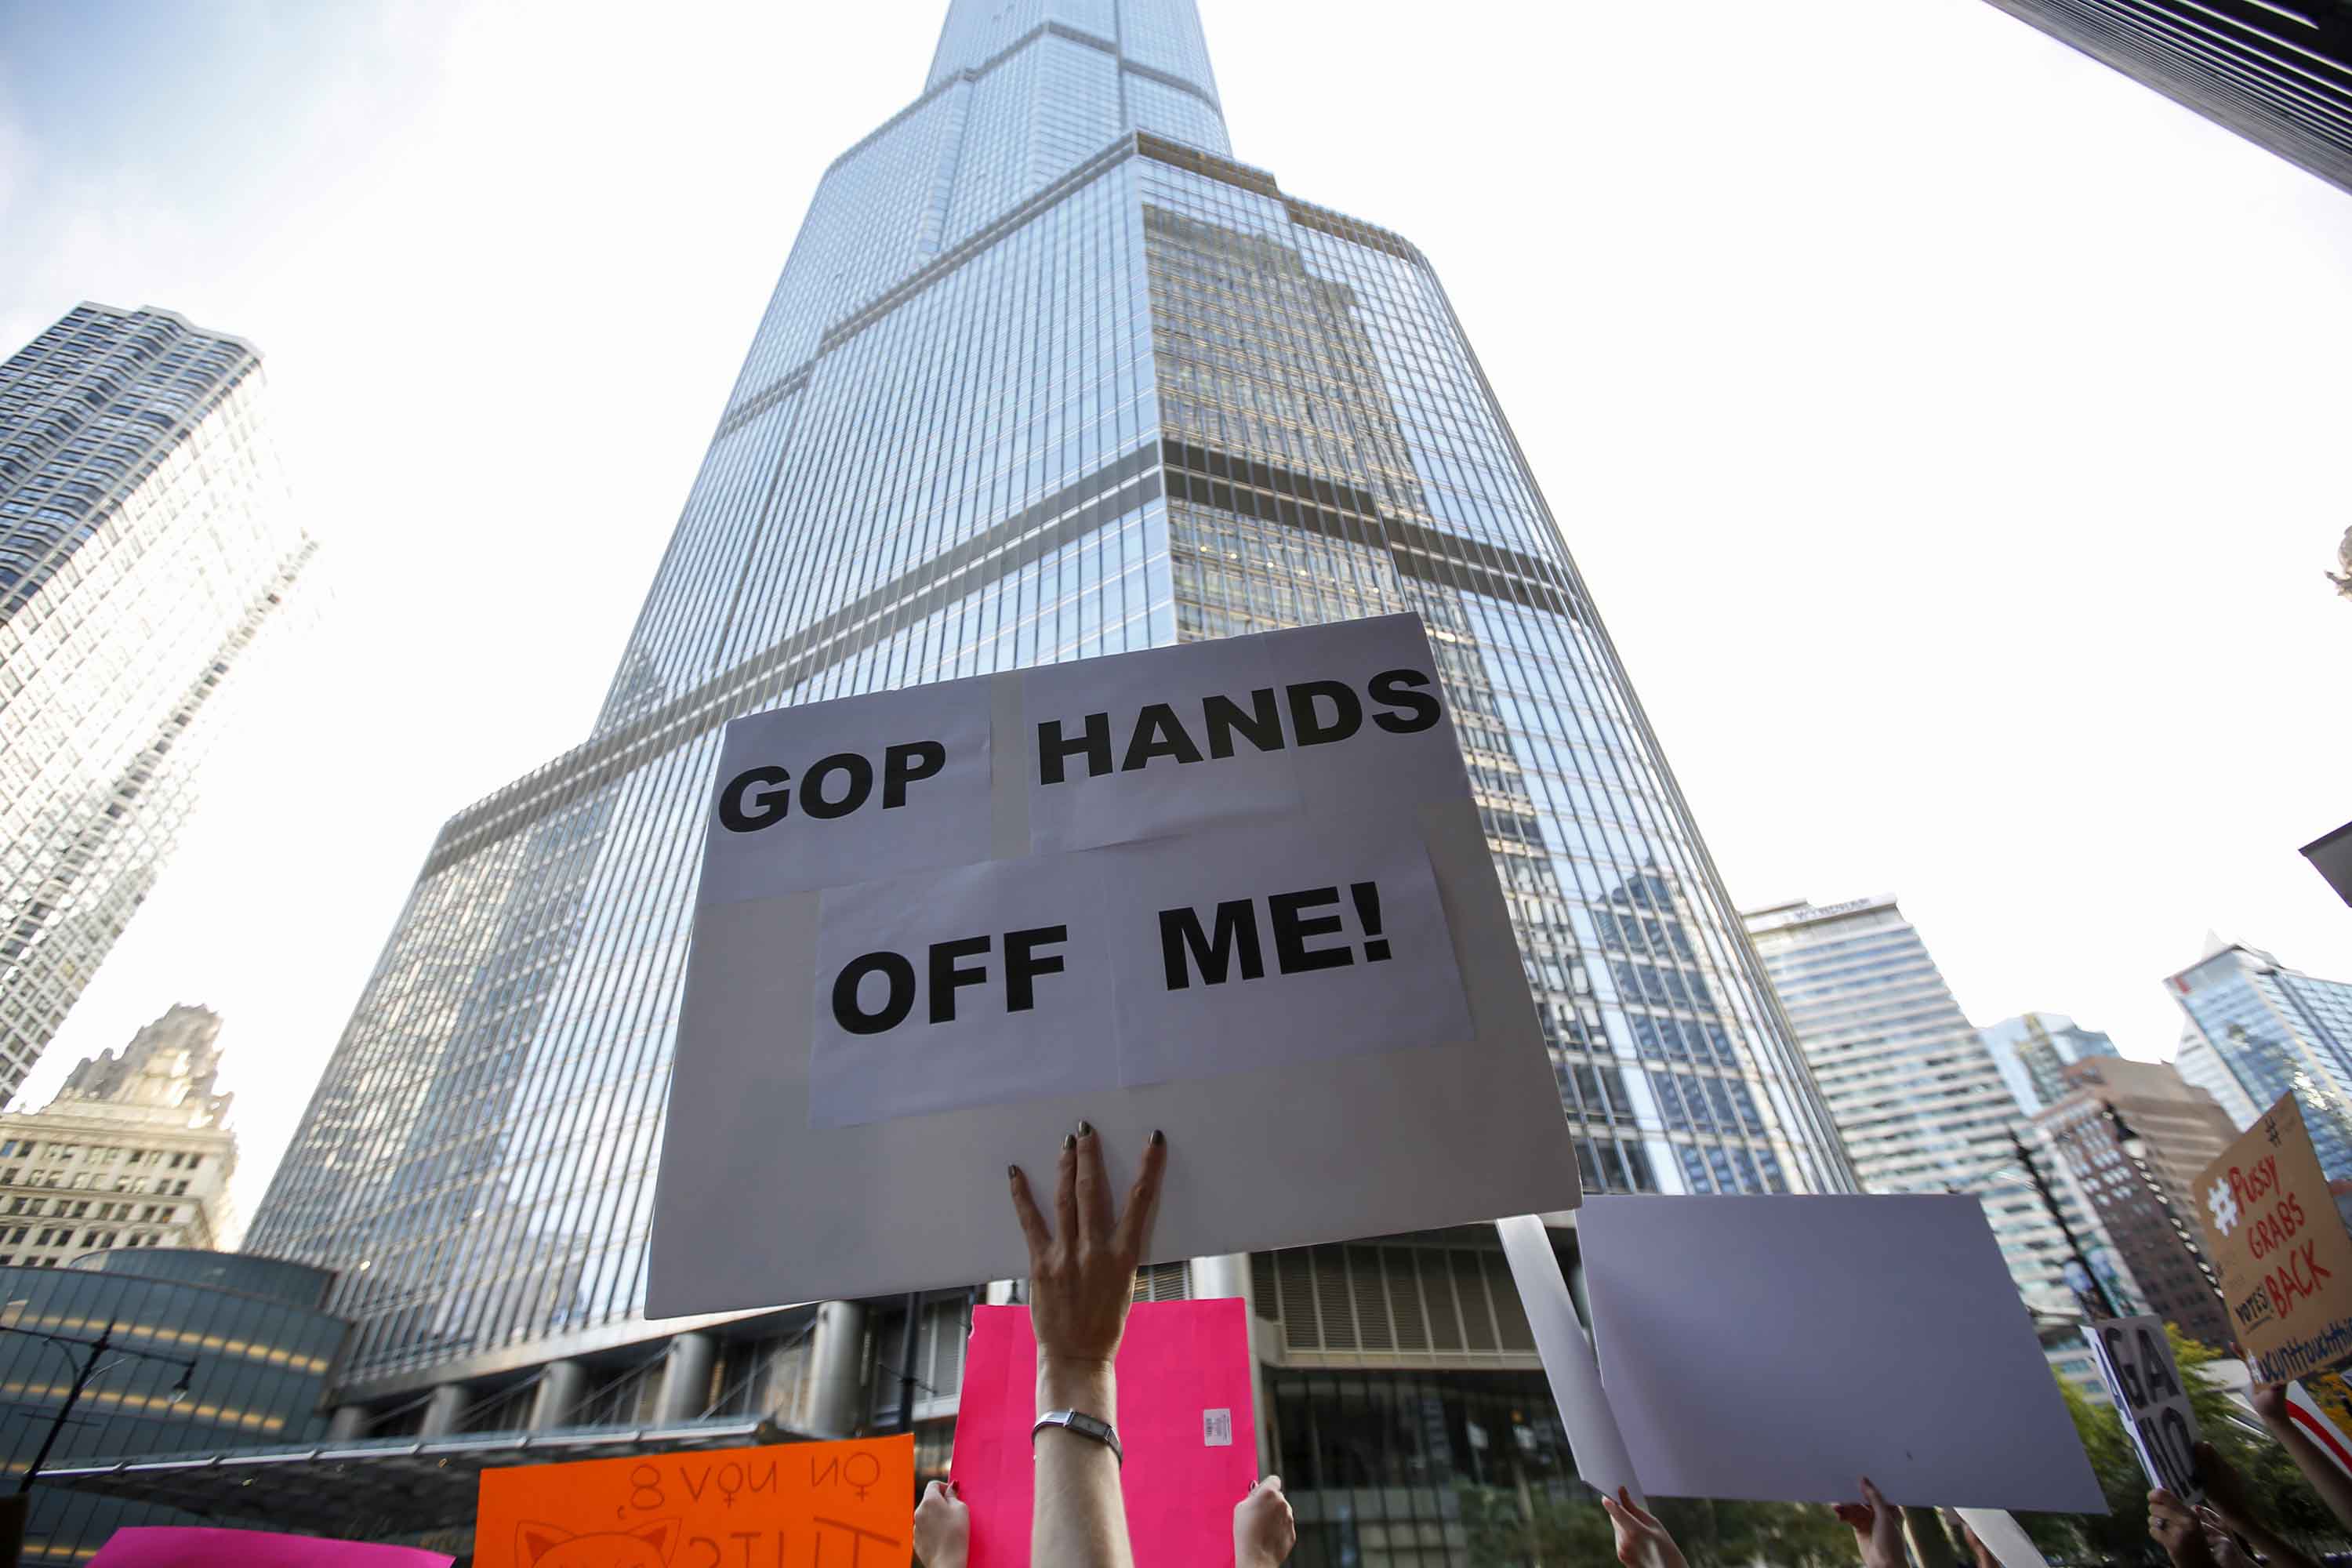 Protesters in opposition to Donald Trump's misogyny protest across the street from Trump Tower on Tuesday, Oct. 18, 2016 in Chicago. (Jose M. Osorio/Chicago Tribune/TNS)